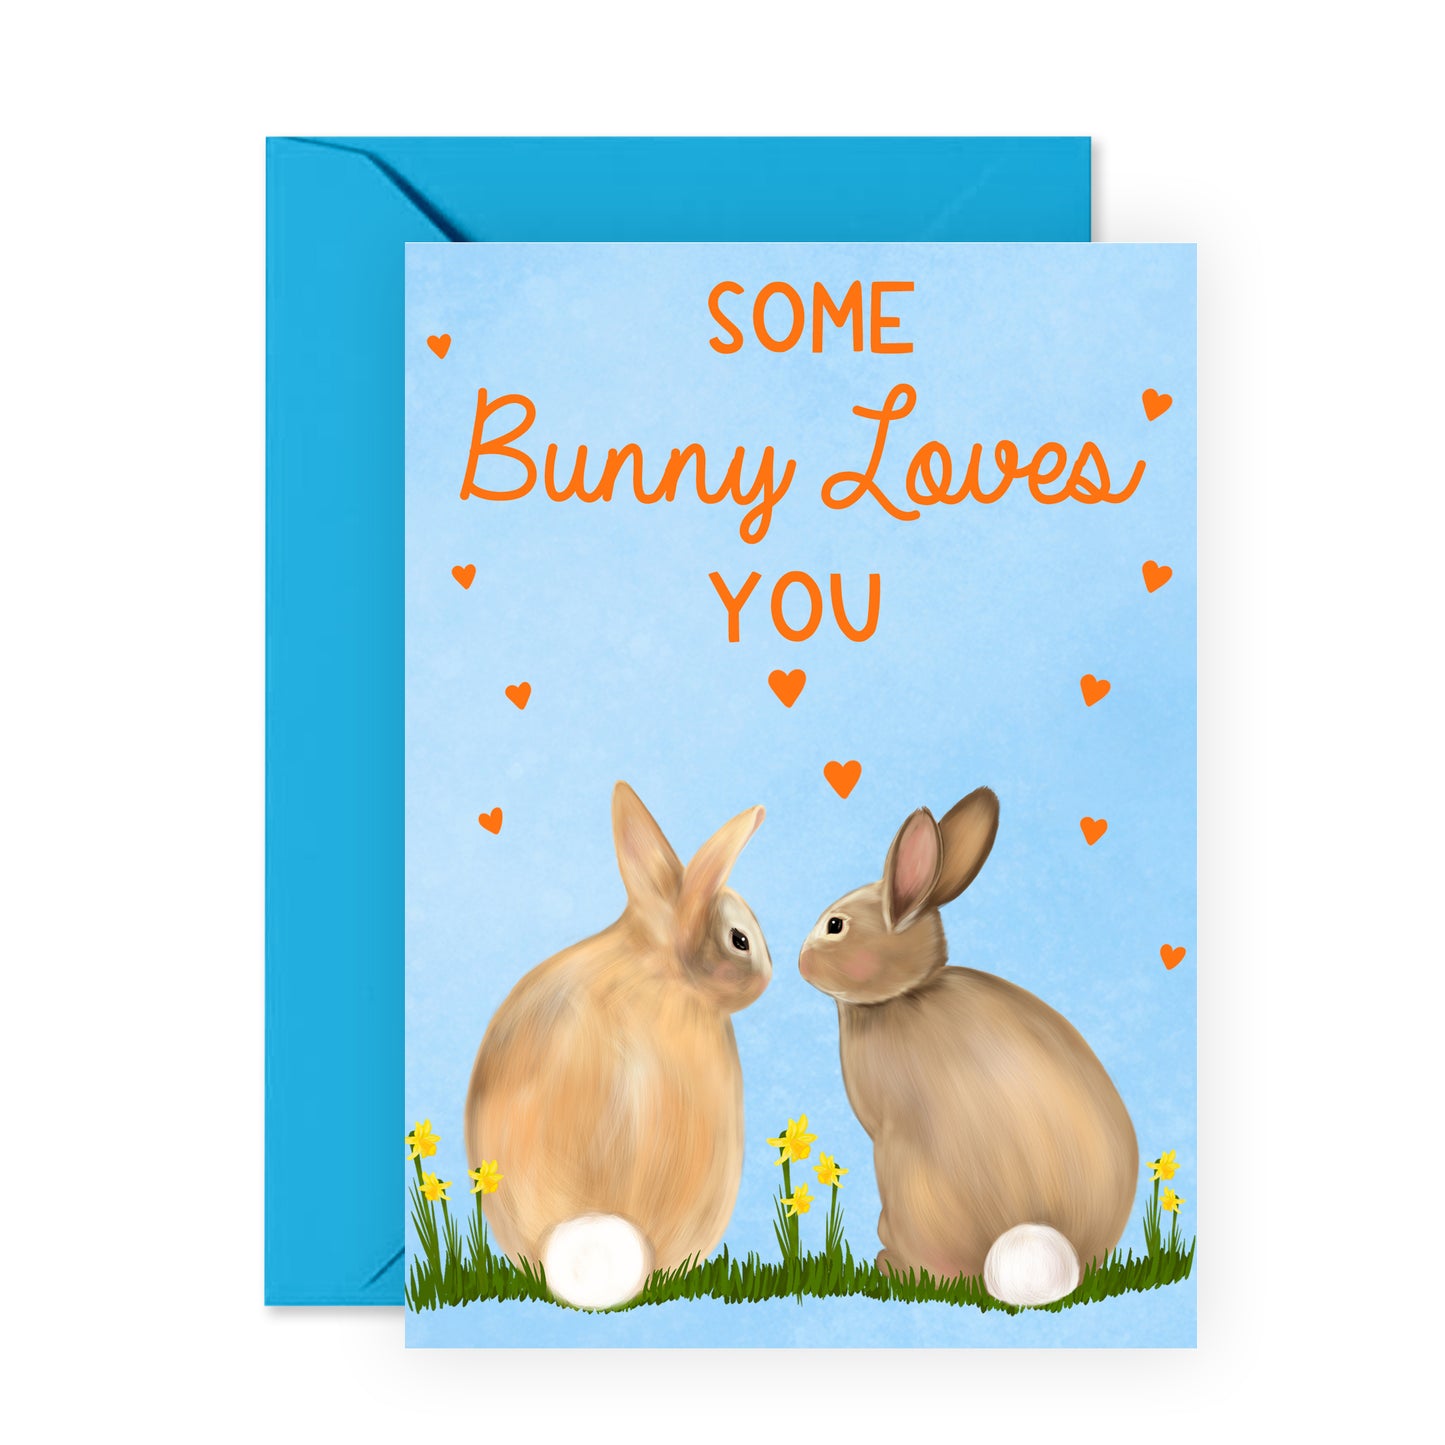 Cute Anniversary Card - Some Bunny Loves You - For Men Women Him Her